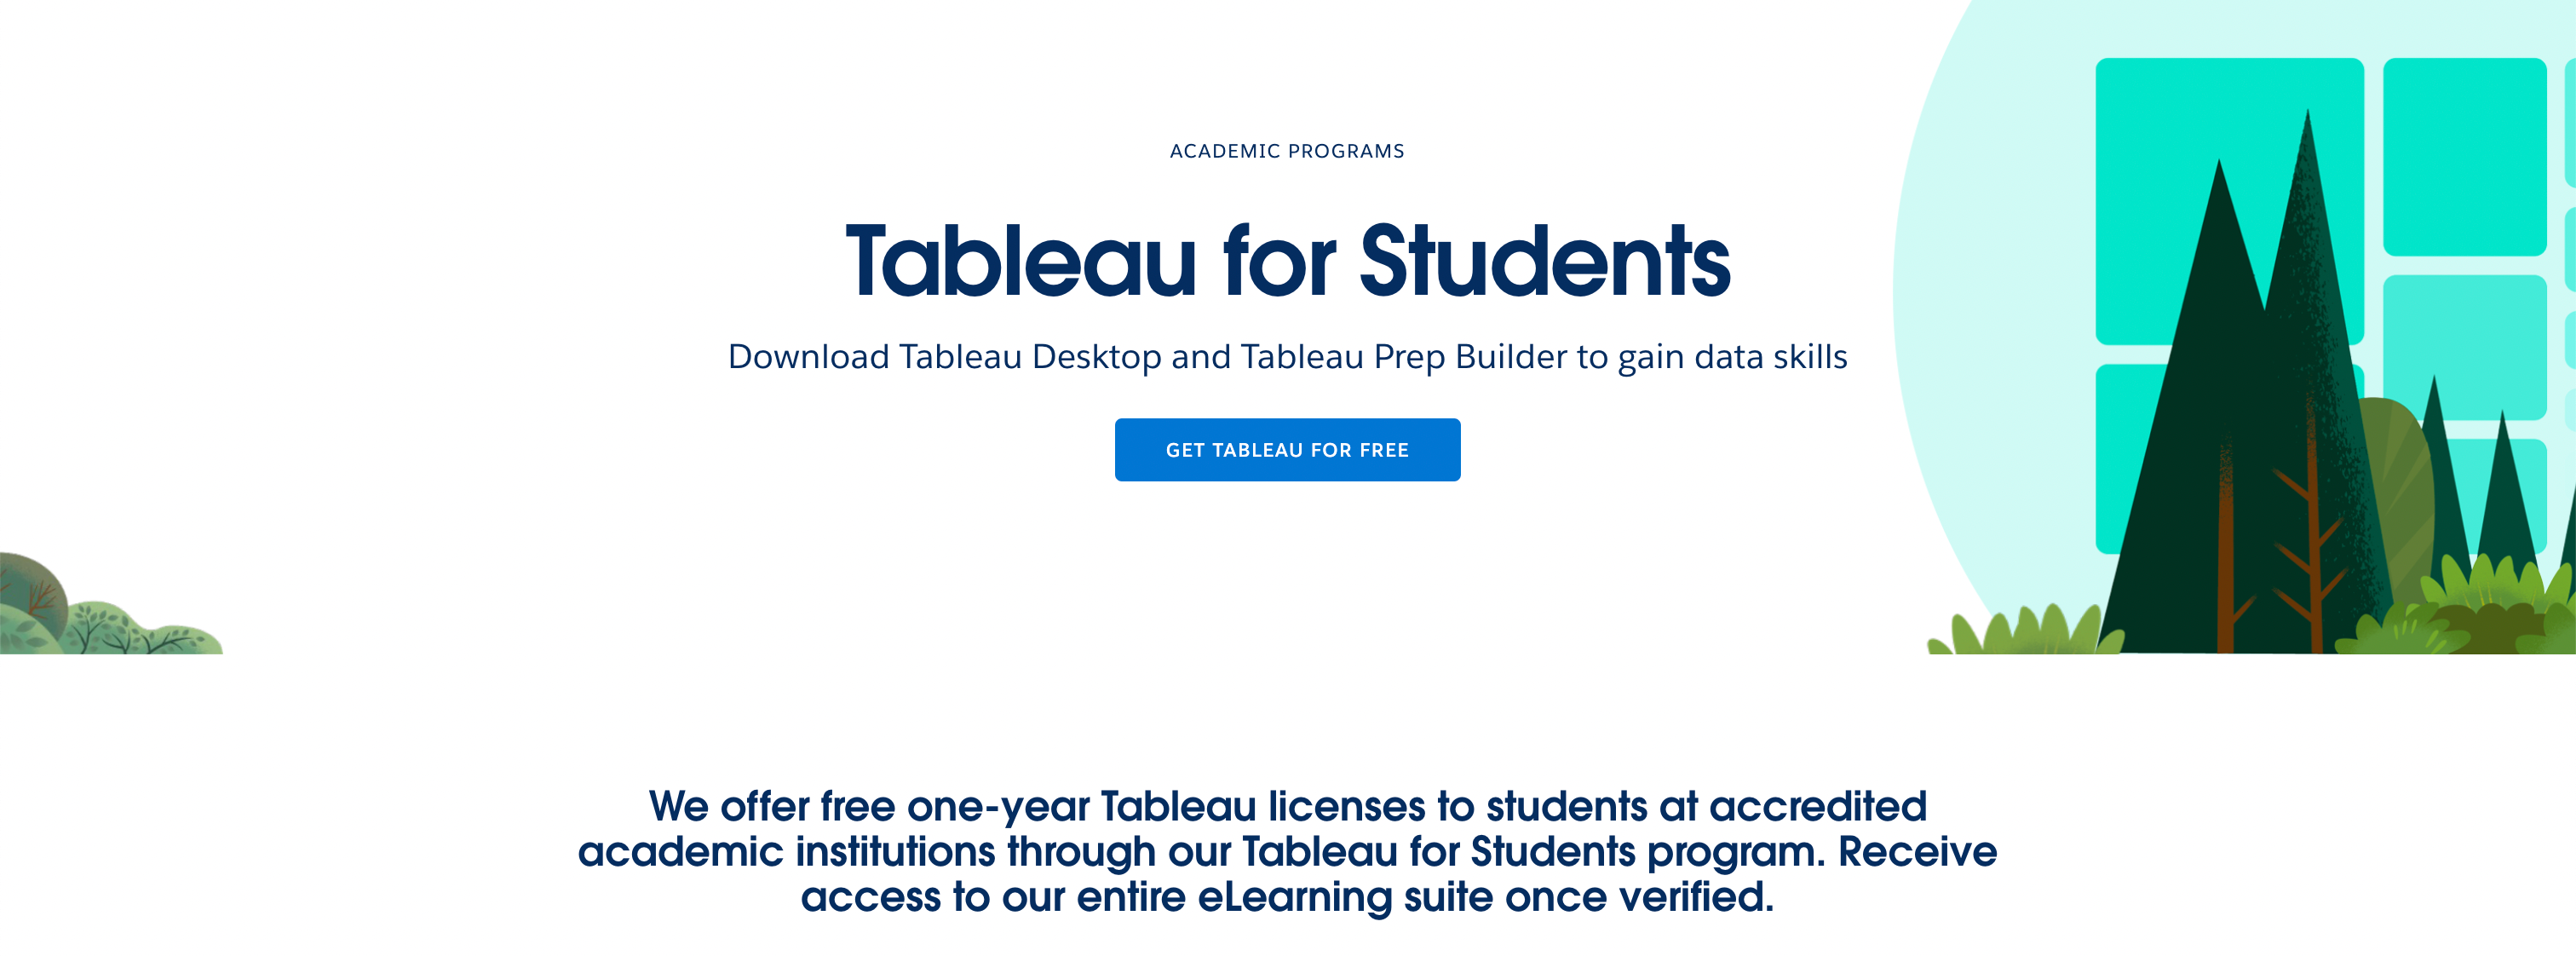 Tableau for Students, https://www.tableau.com/academic/students